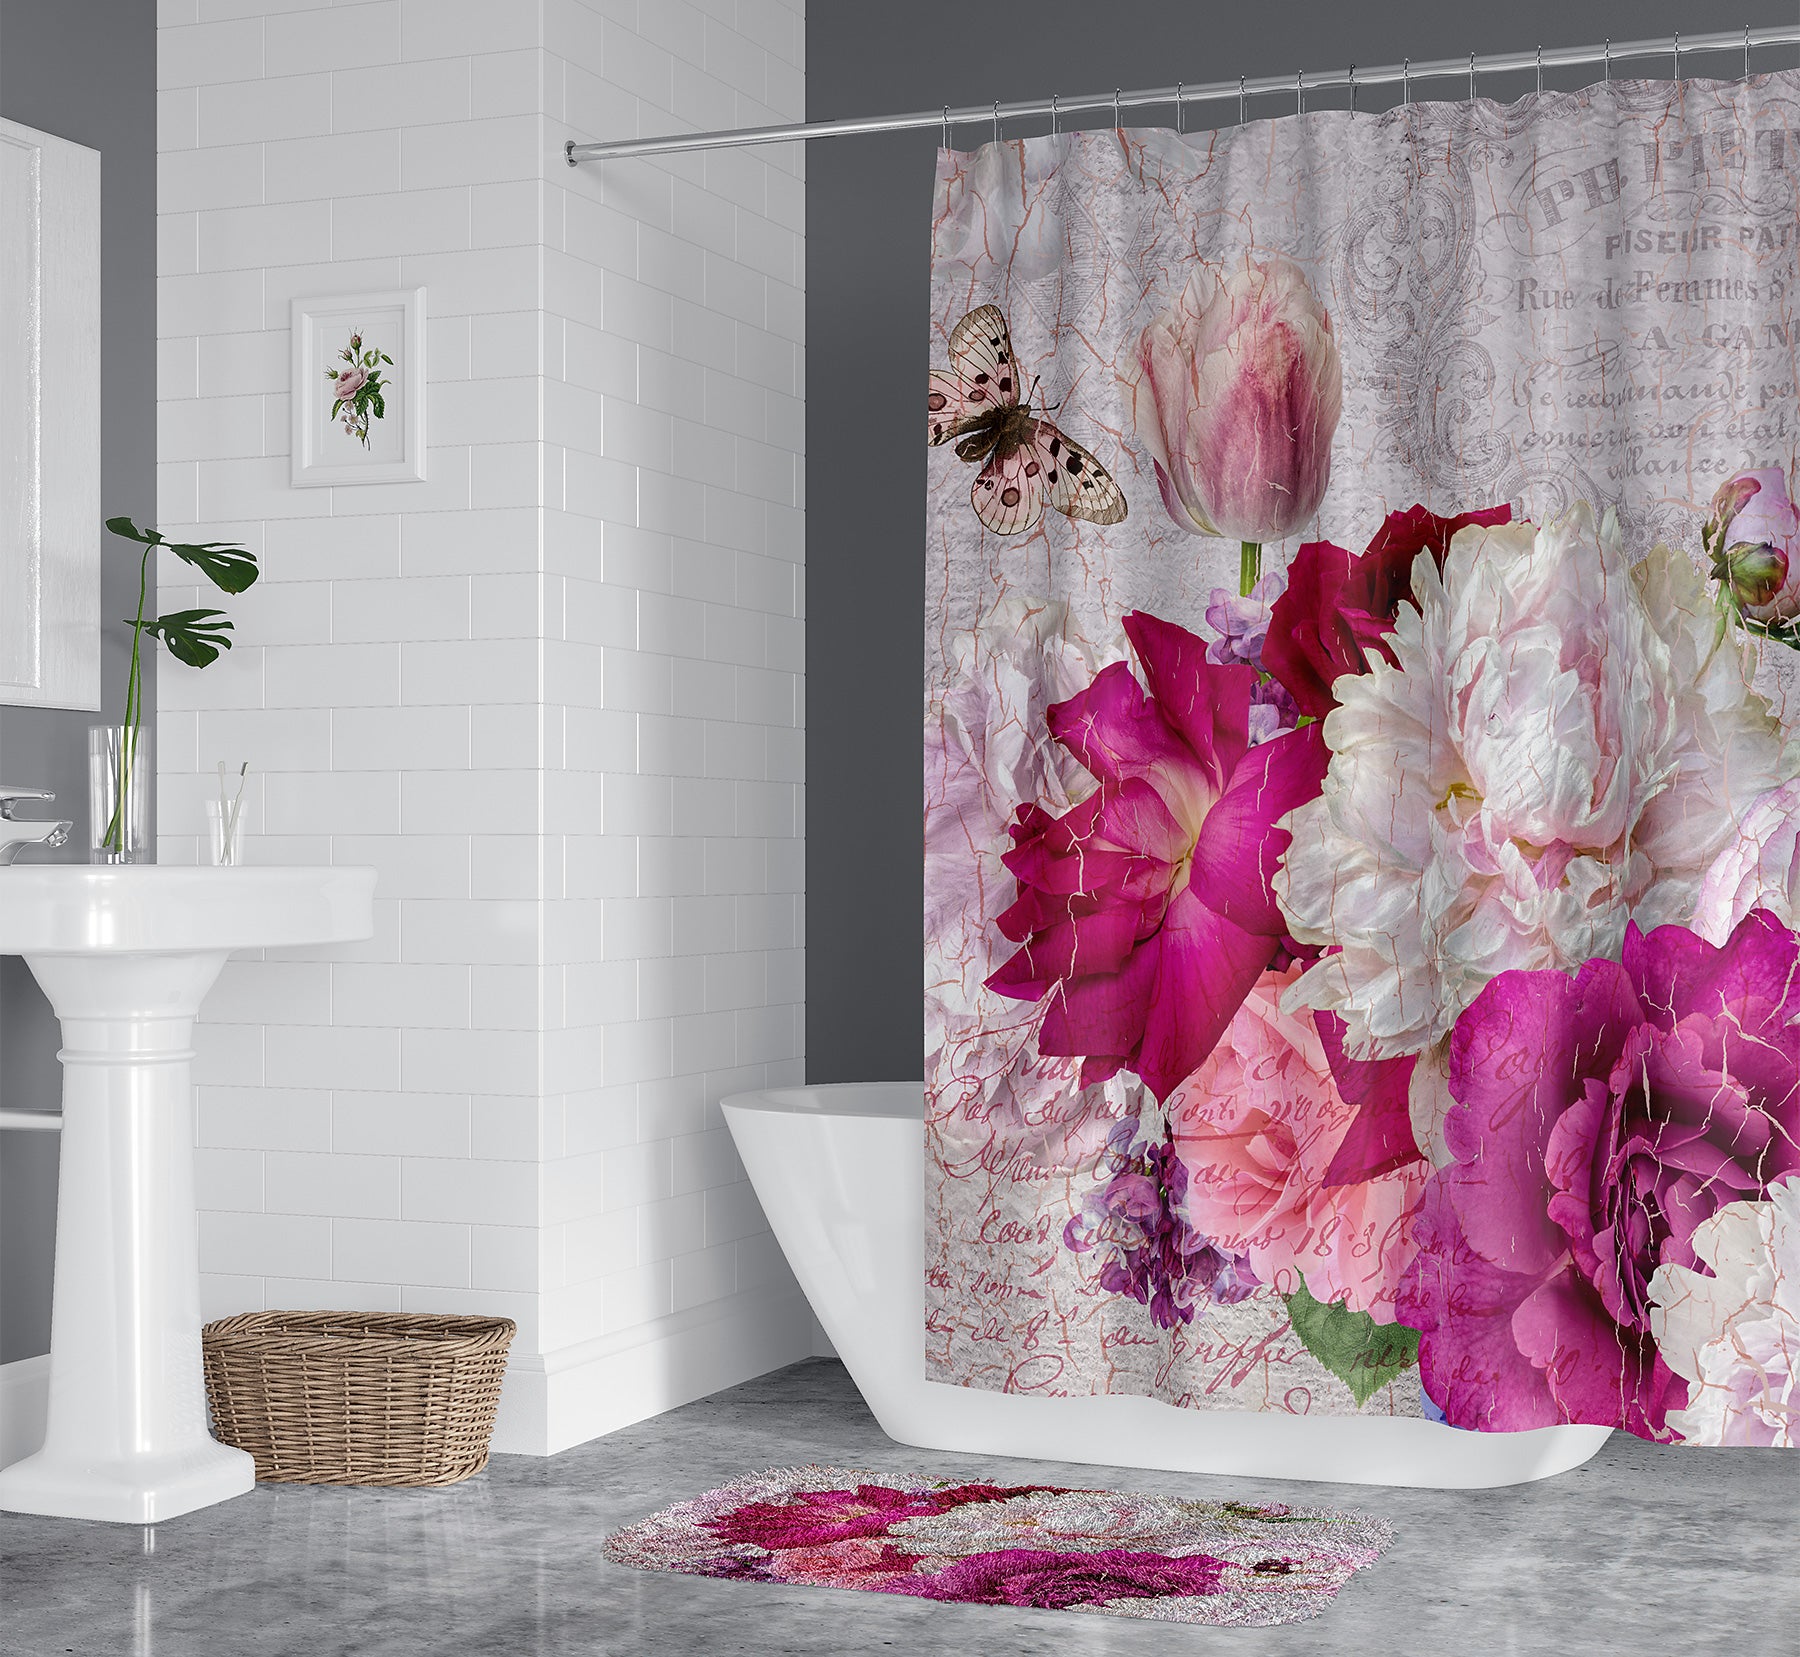 Shower curtain design with vintage French and photographic flowers.